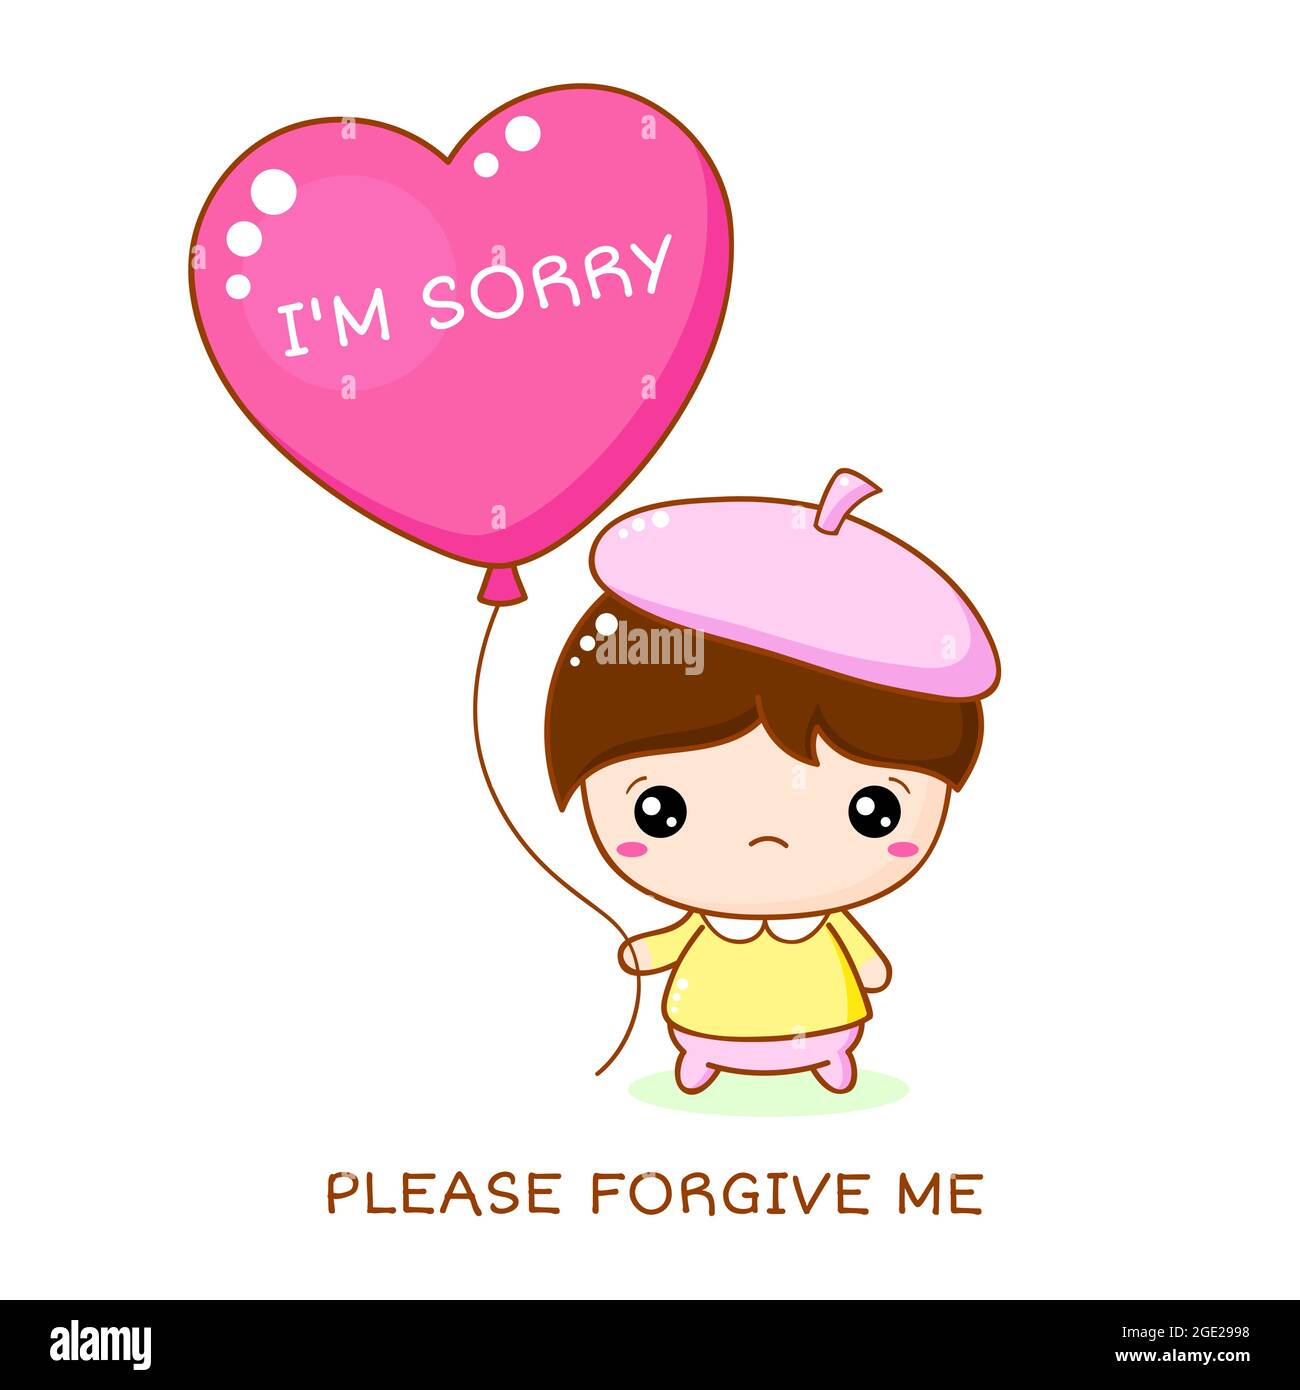 Apologize card. Sadness kawaii little boy with red heart shaped ...